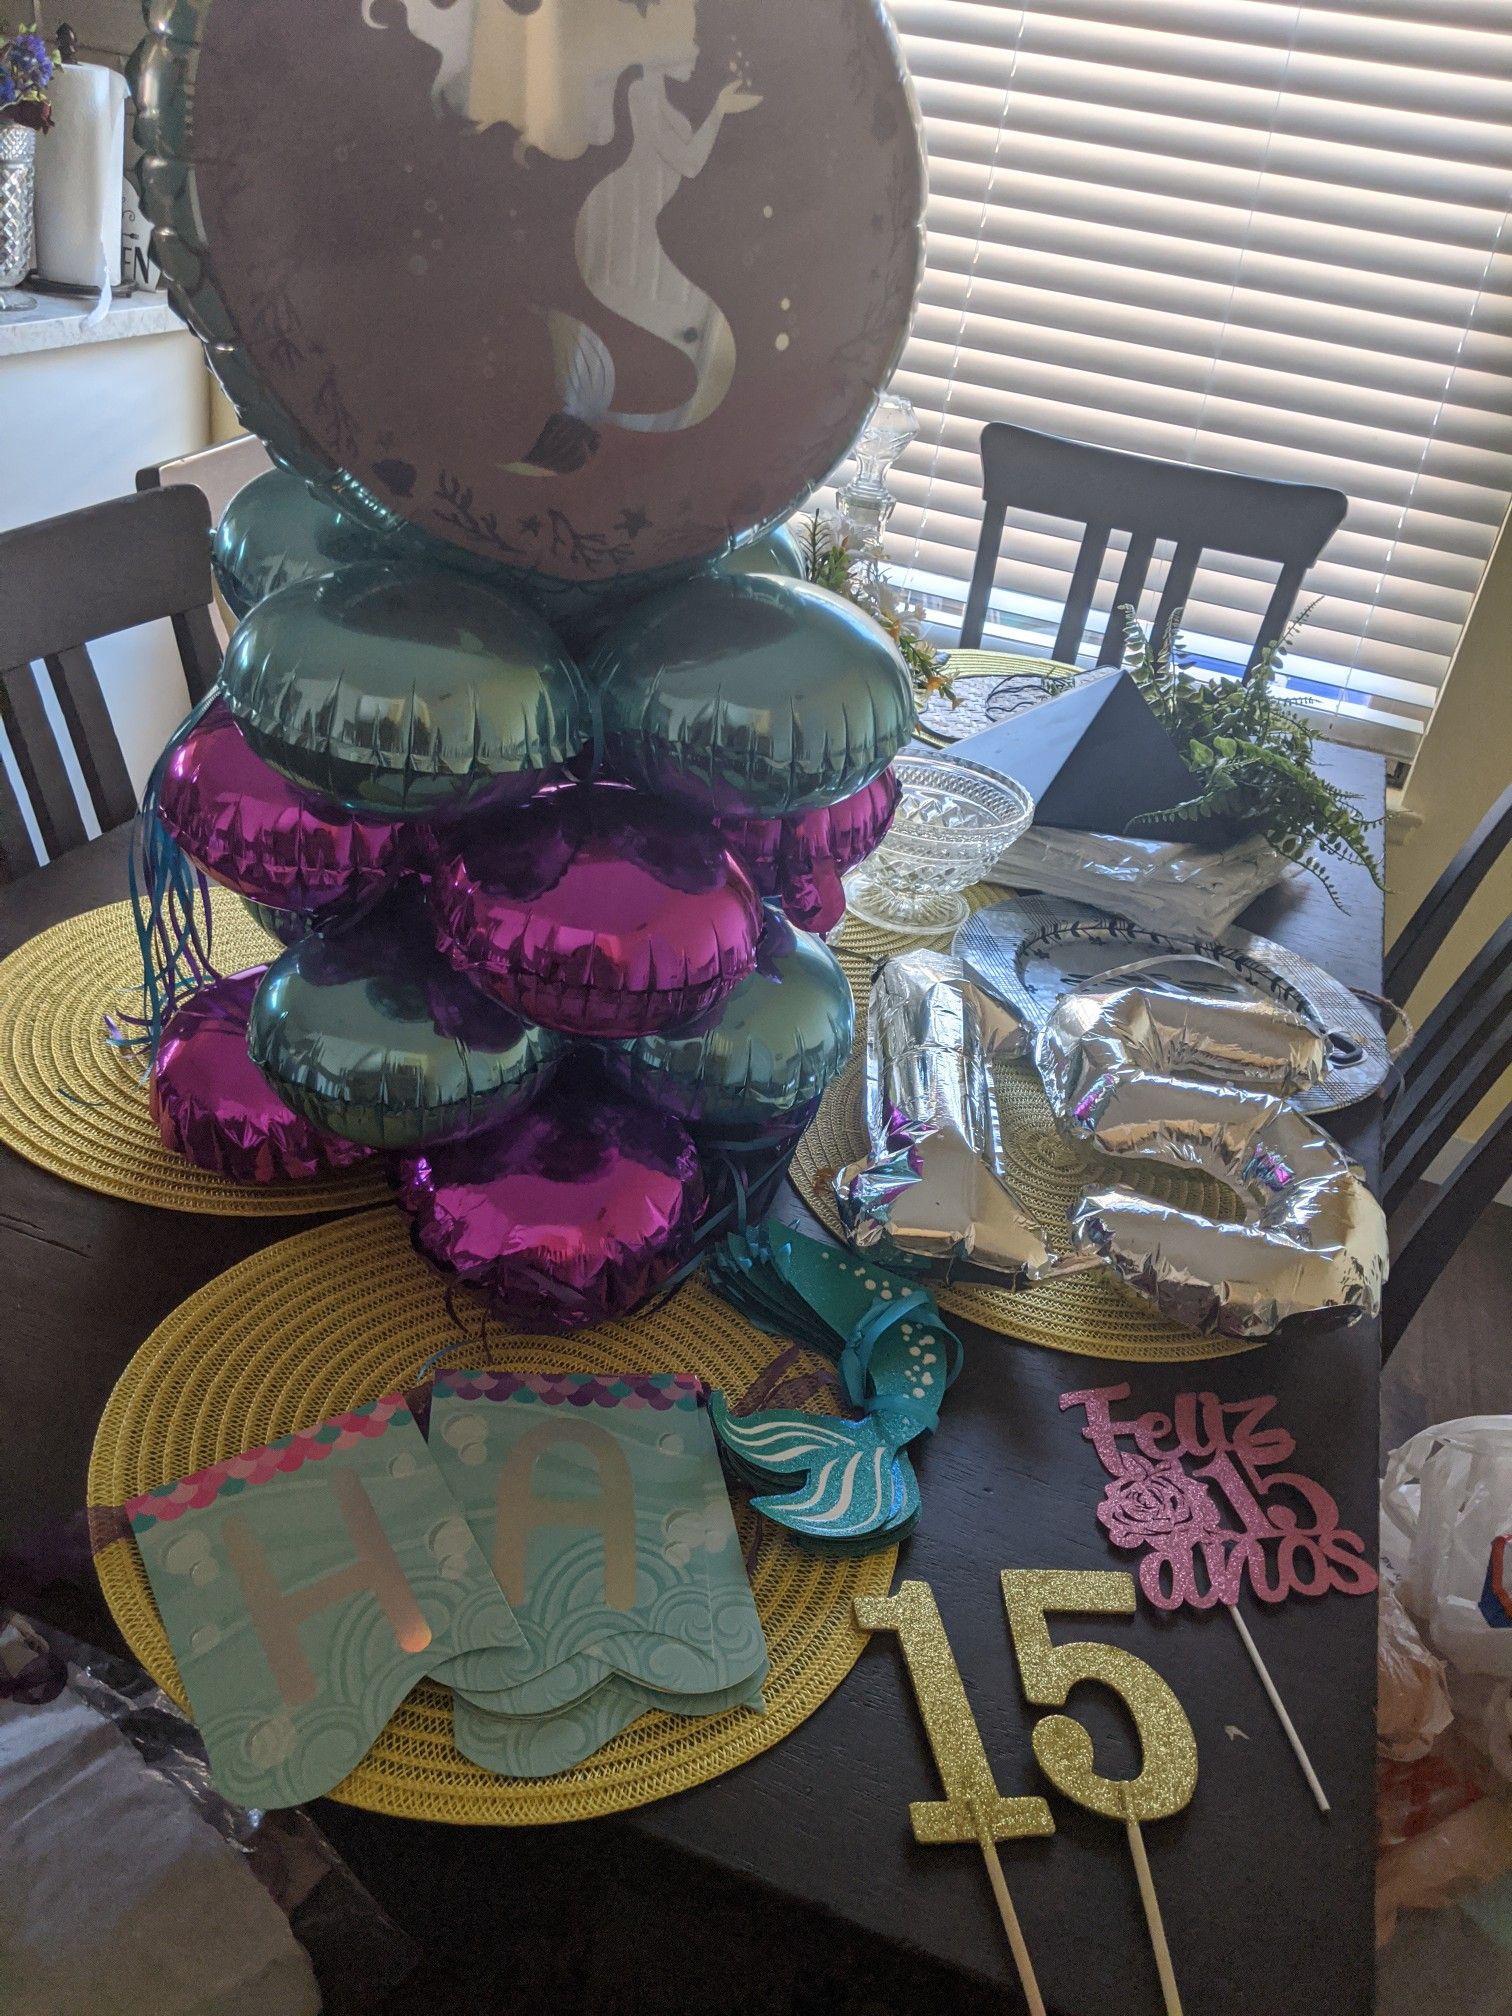 Free! Mermaid party decorations